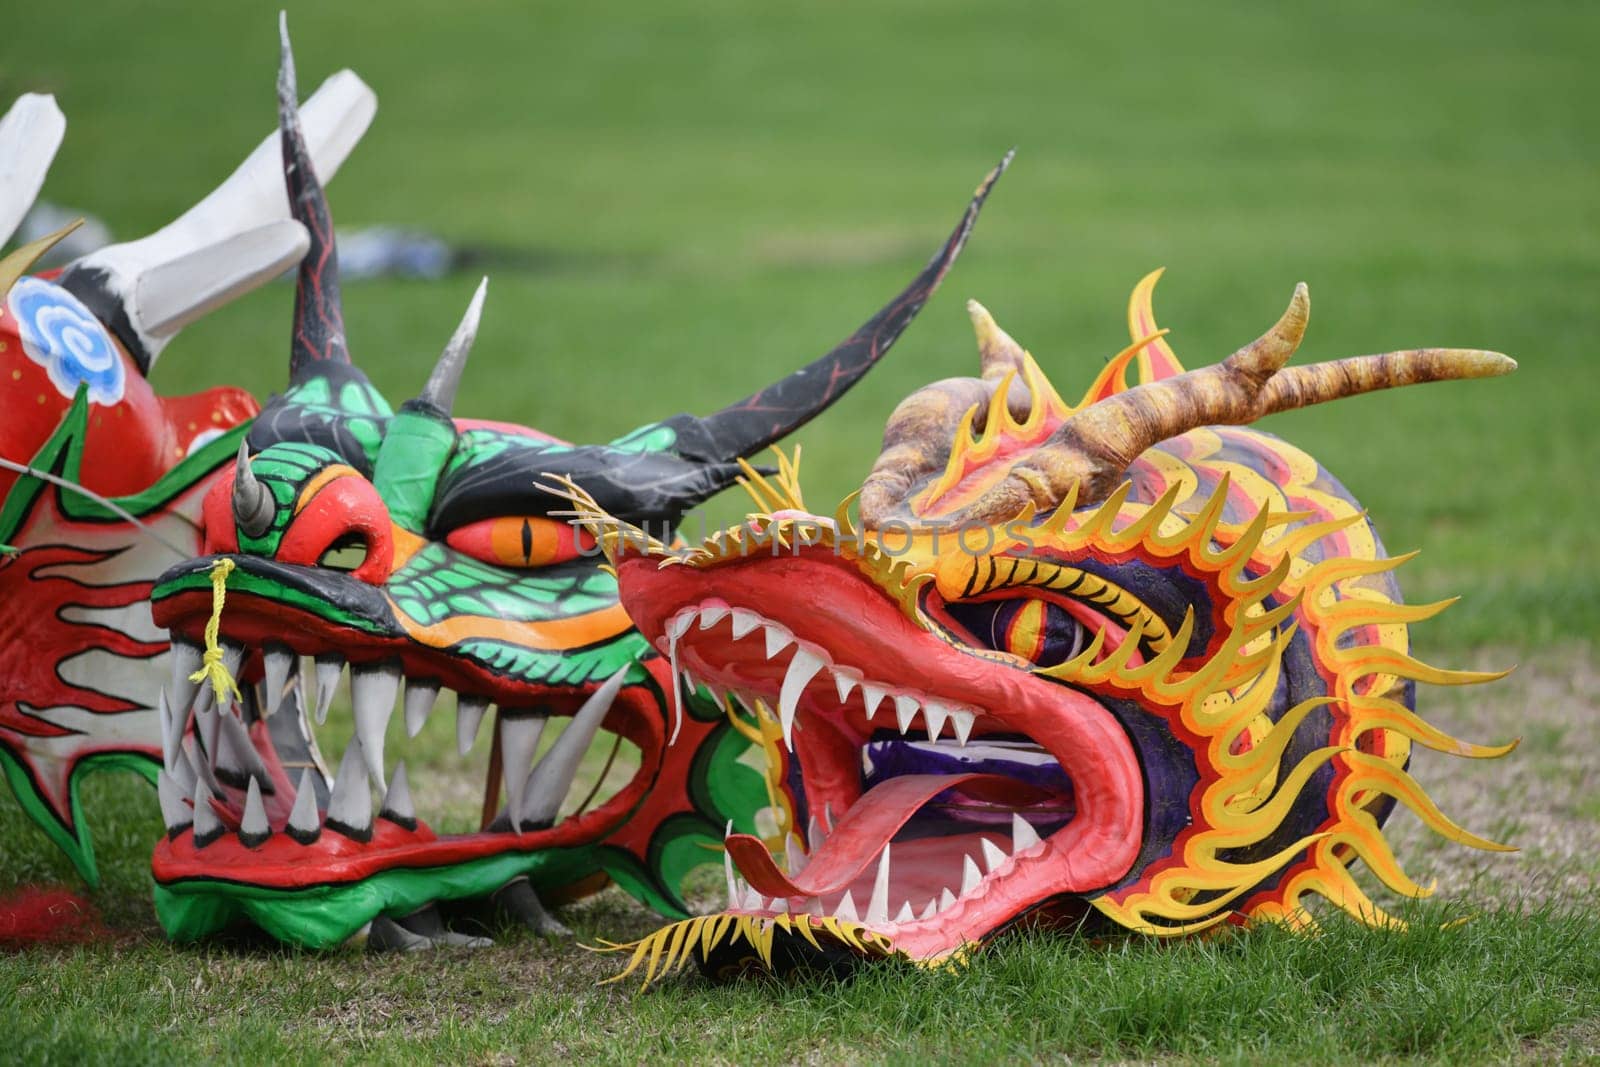 Heads of the toothy dragon kites